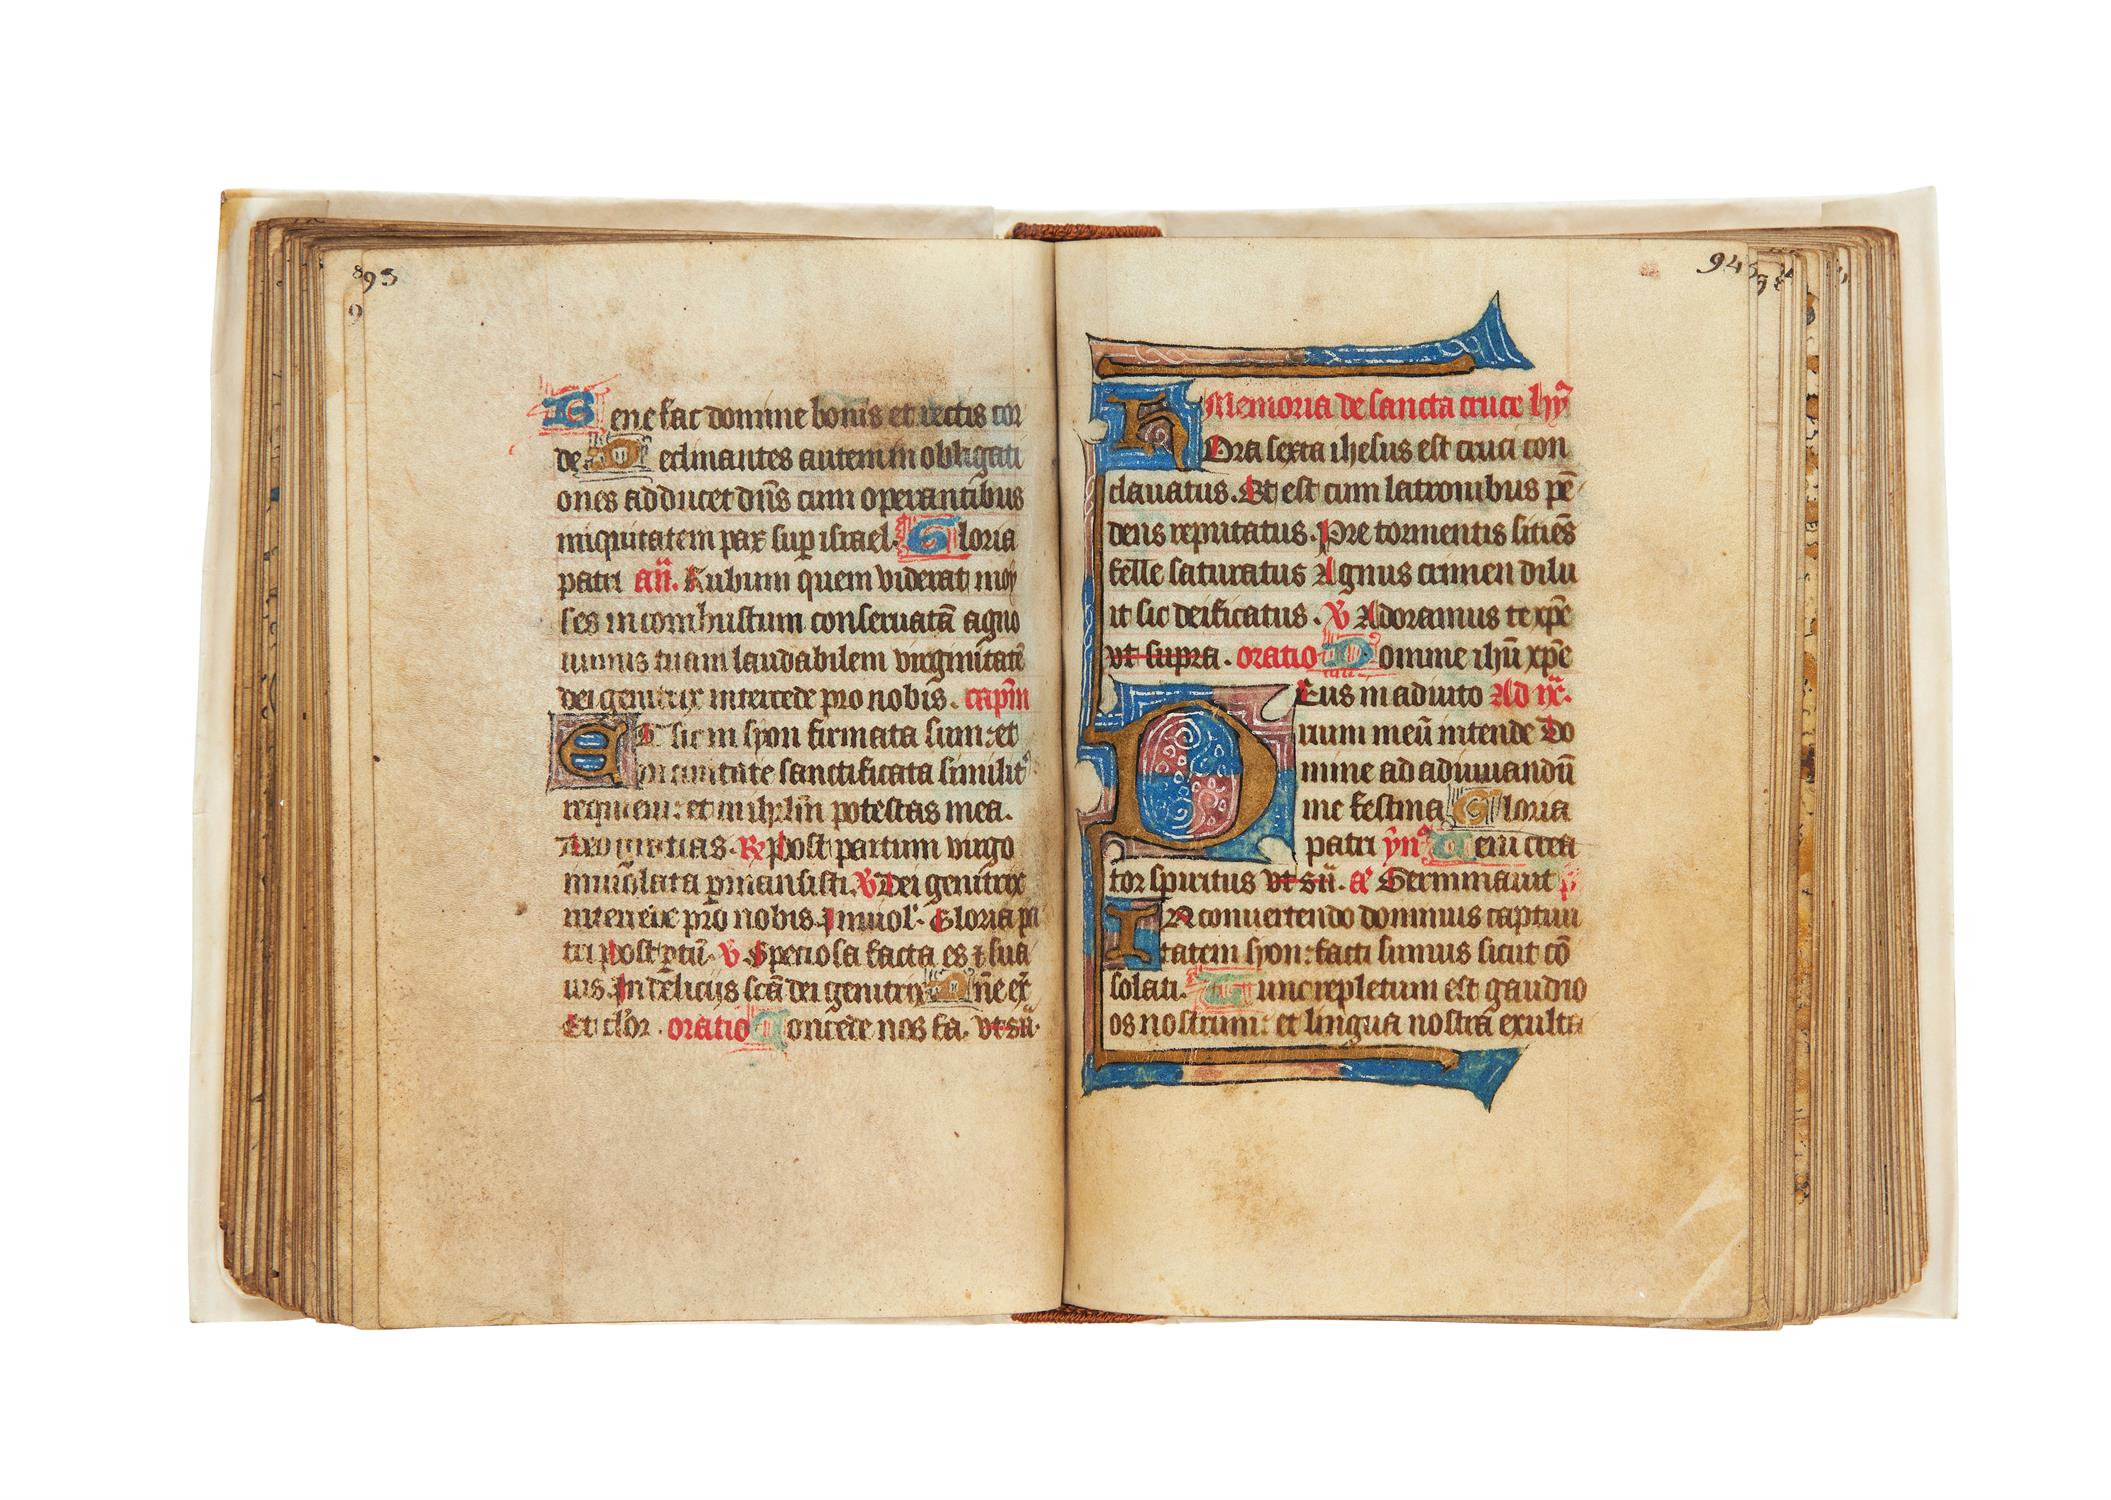 Ɵ Book of Hours, Use of Sarum, in Latin with Middle English inscription, illuminated manuscript - Image 3 of 5